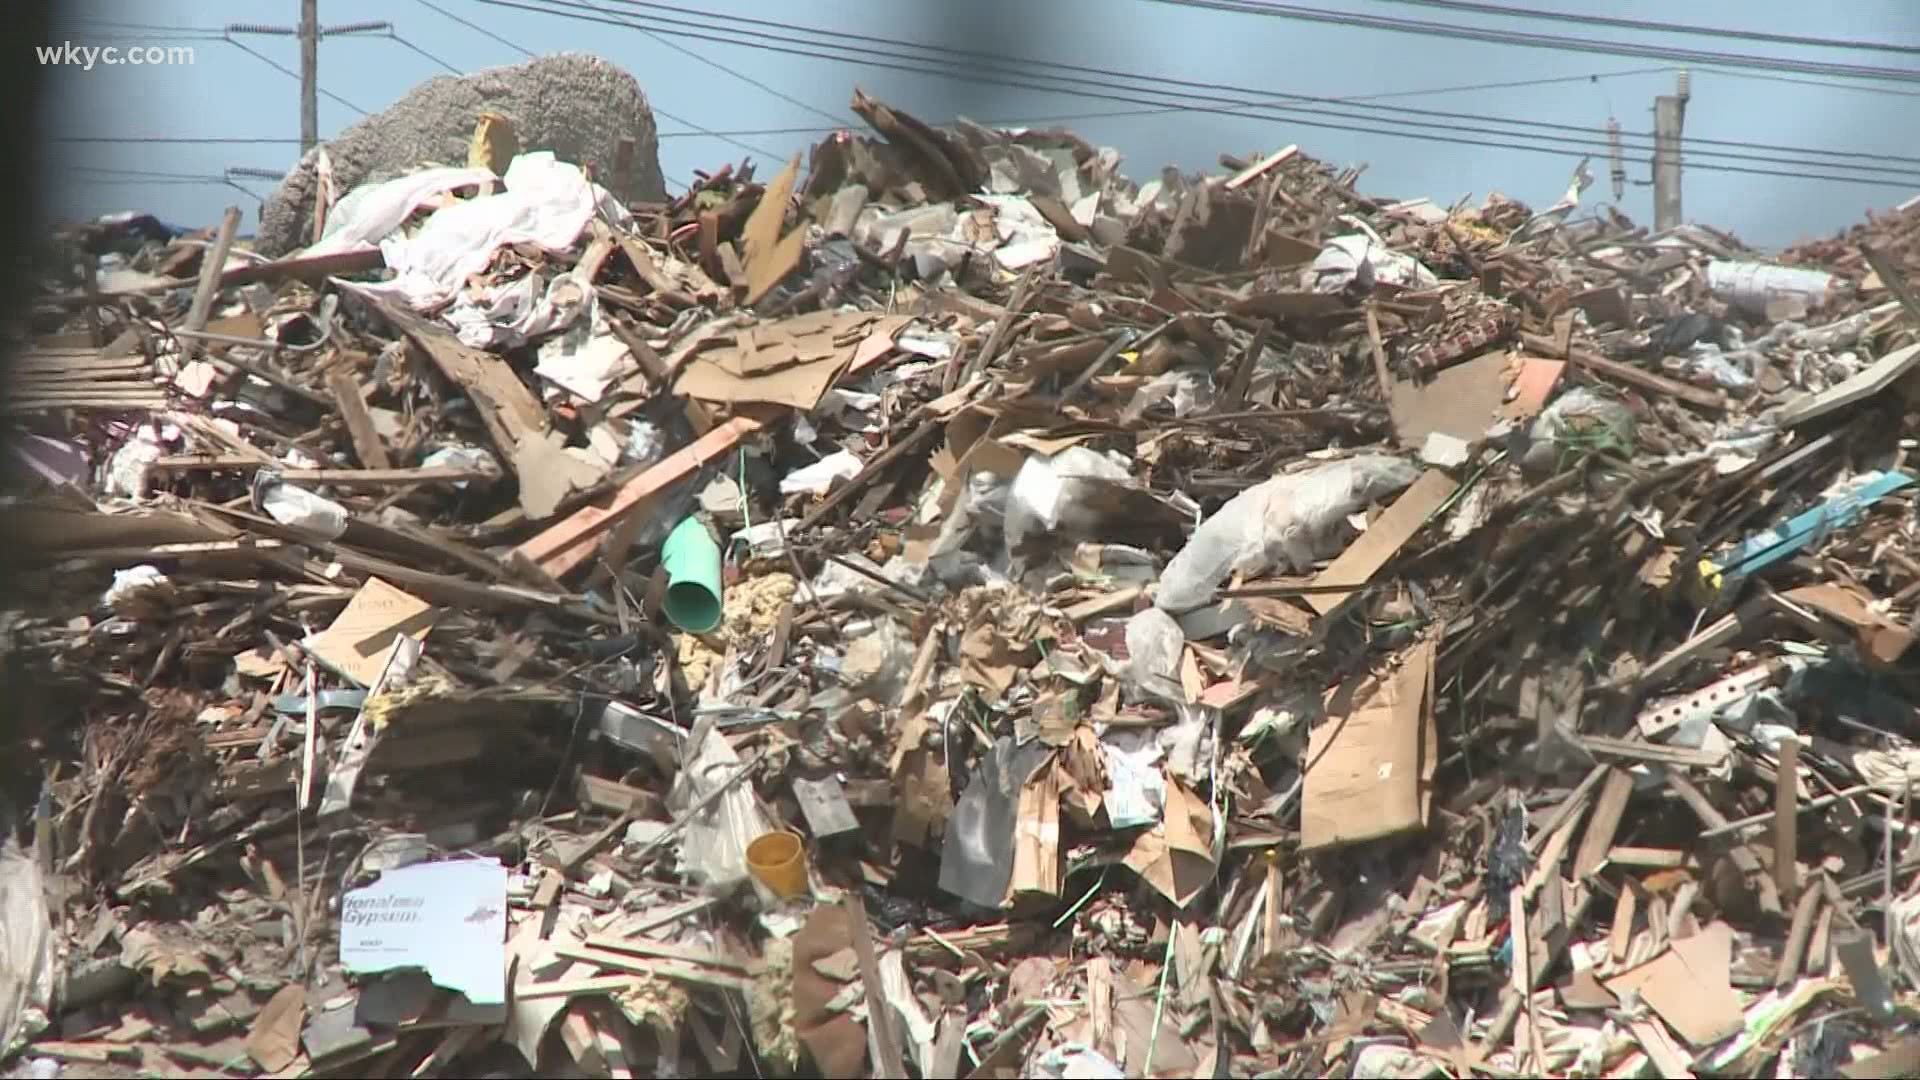 January Keaton has reaction from neighbors of the dump who are asking– what about them?